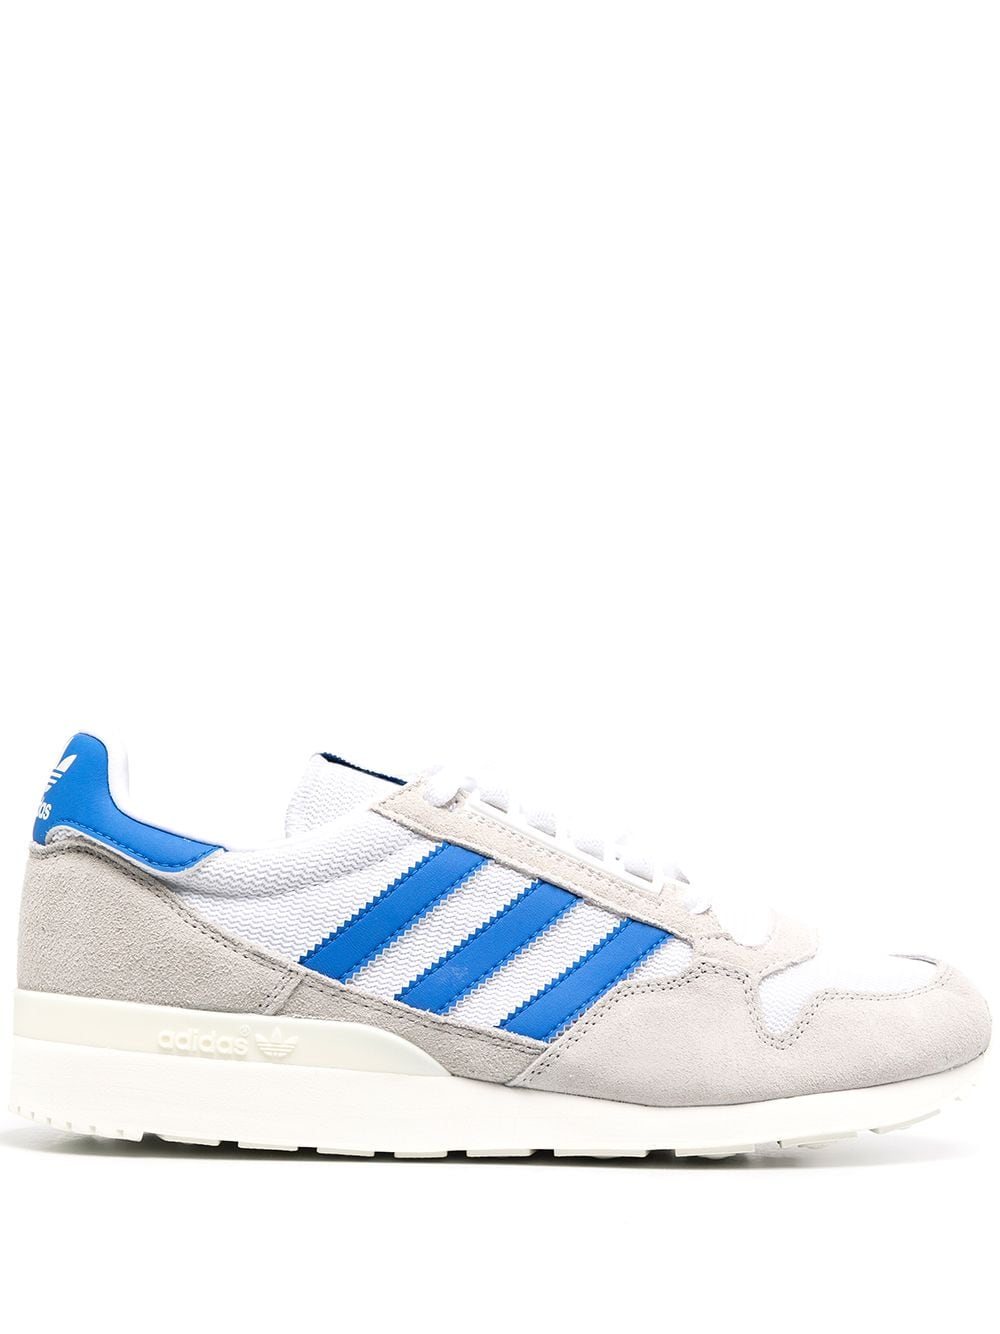 adidas zx 500 recycled